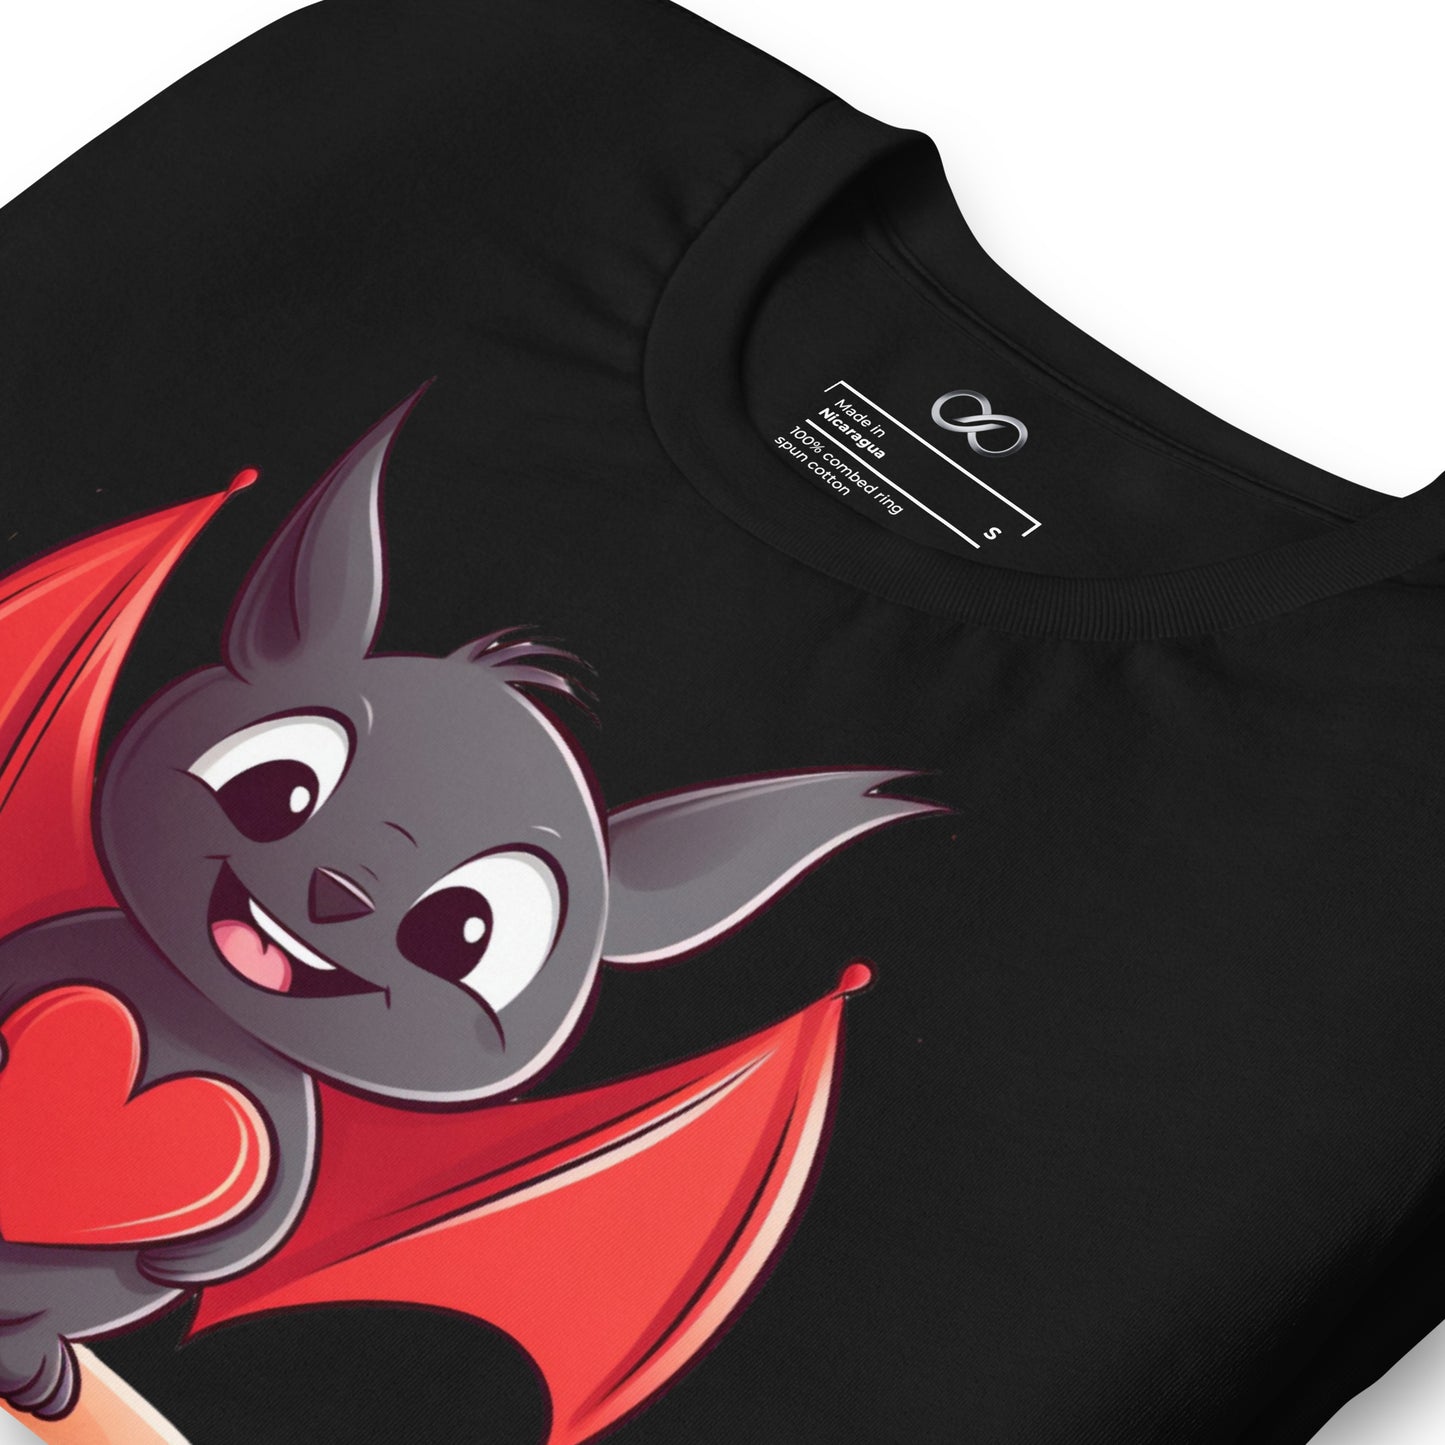 Zoomed-in view of a black t-shirt featuring a cute cartoon bat character with red wings holding a heart, emphasizing the graphic detail on the fabric.